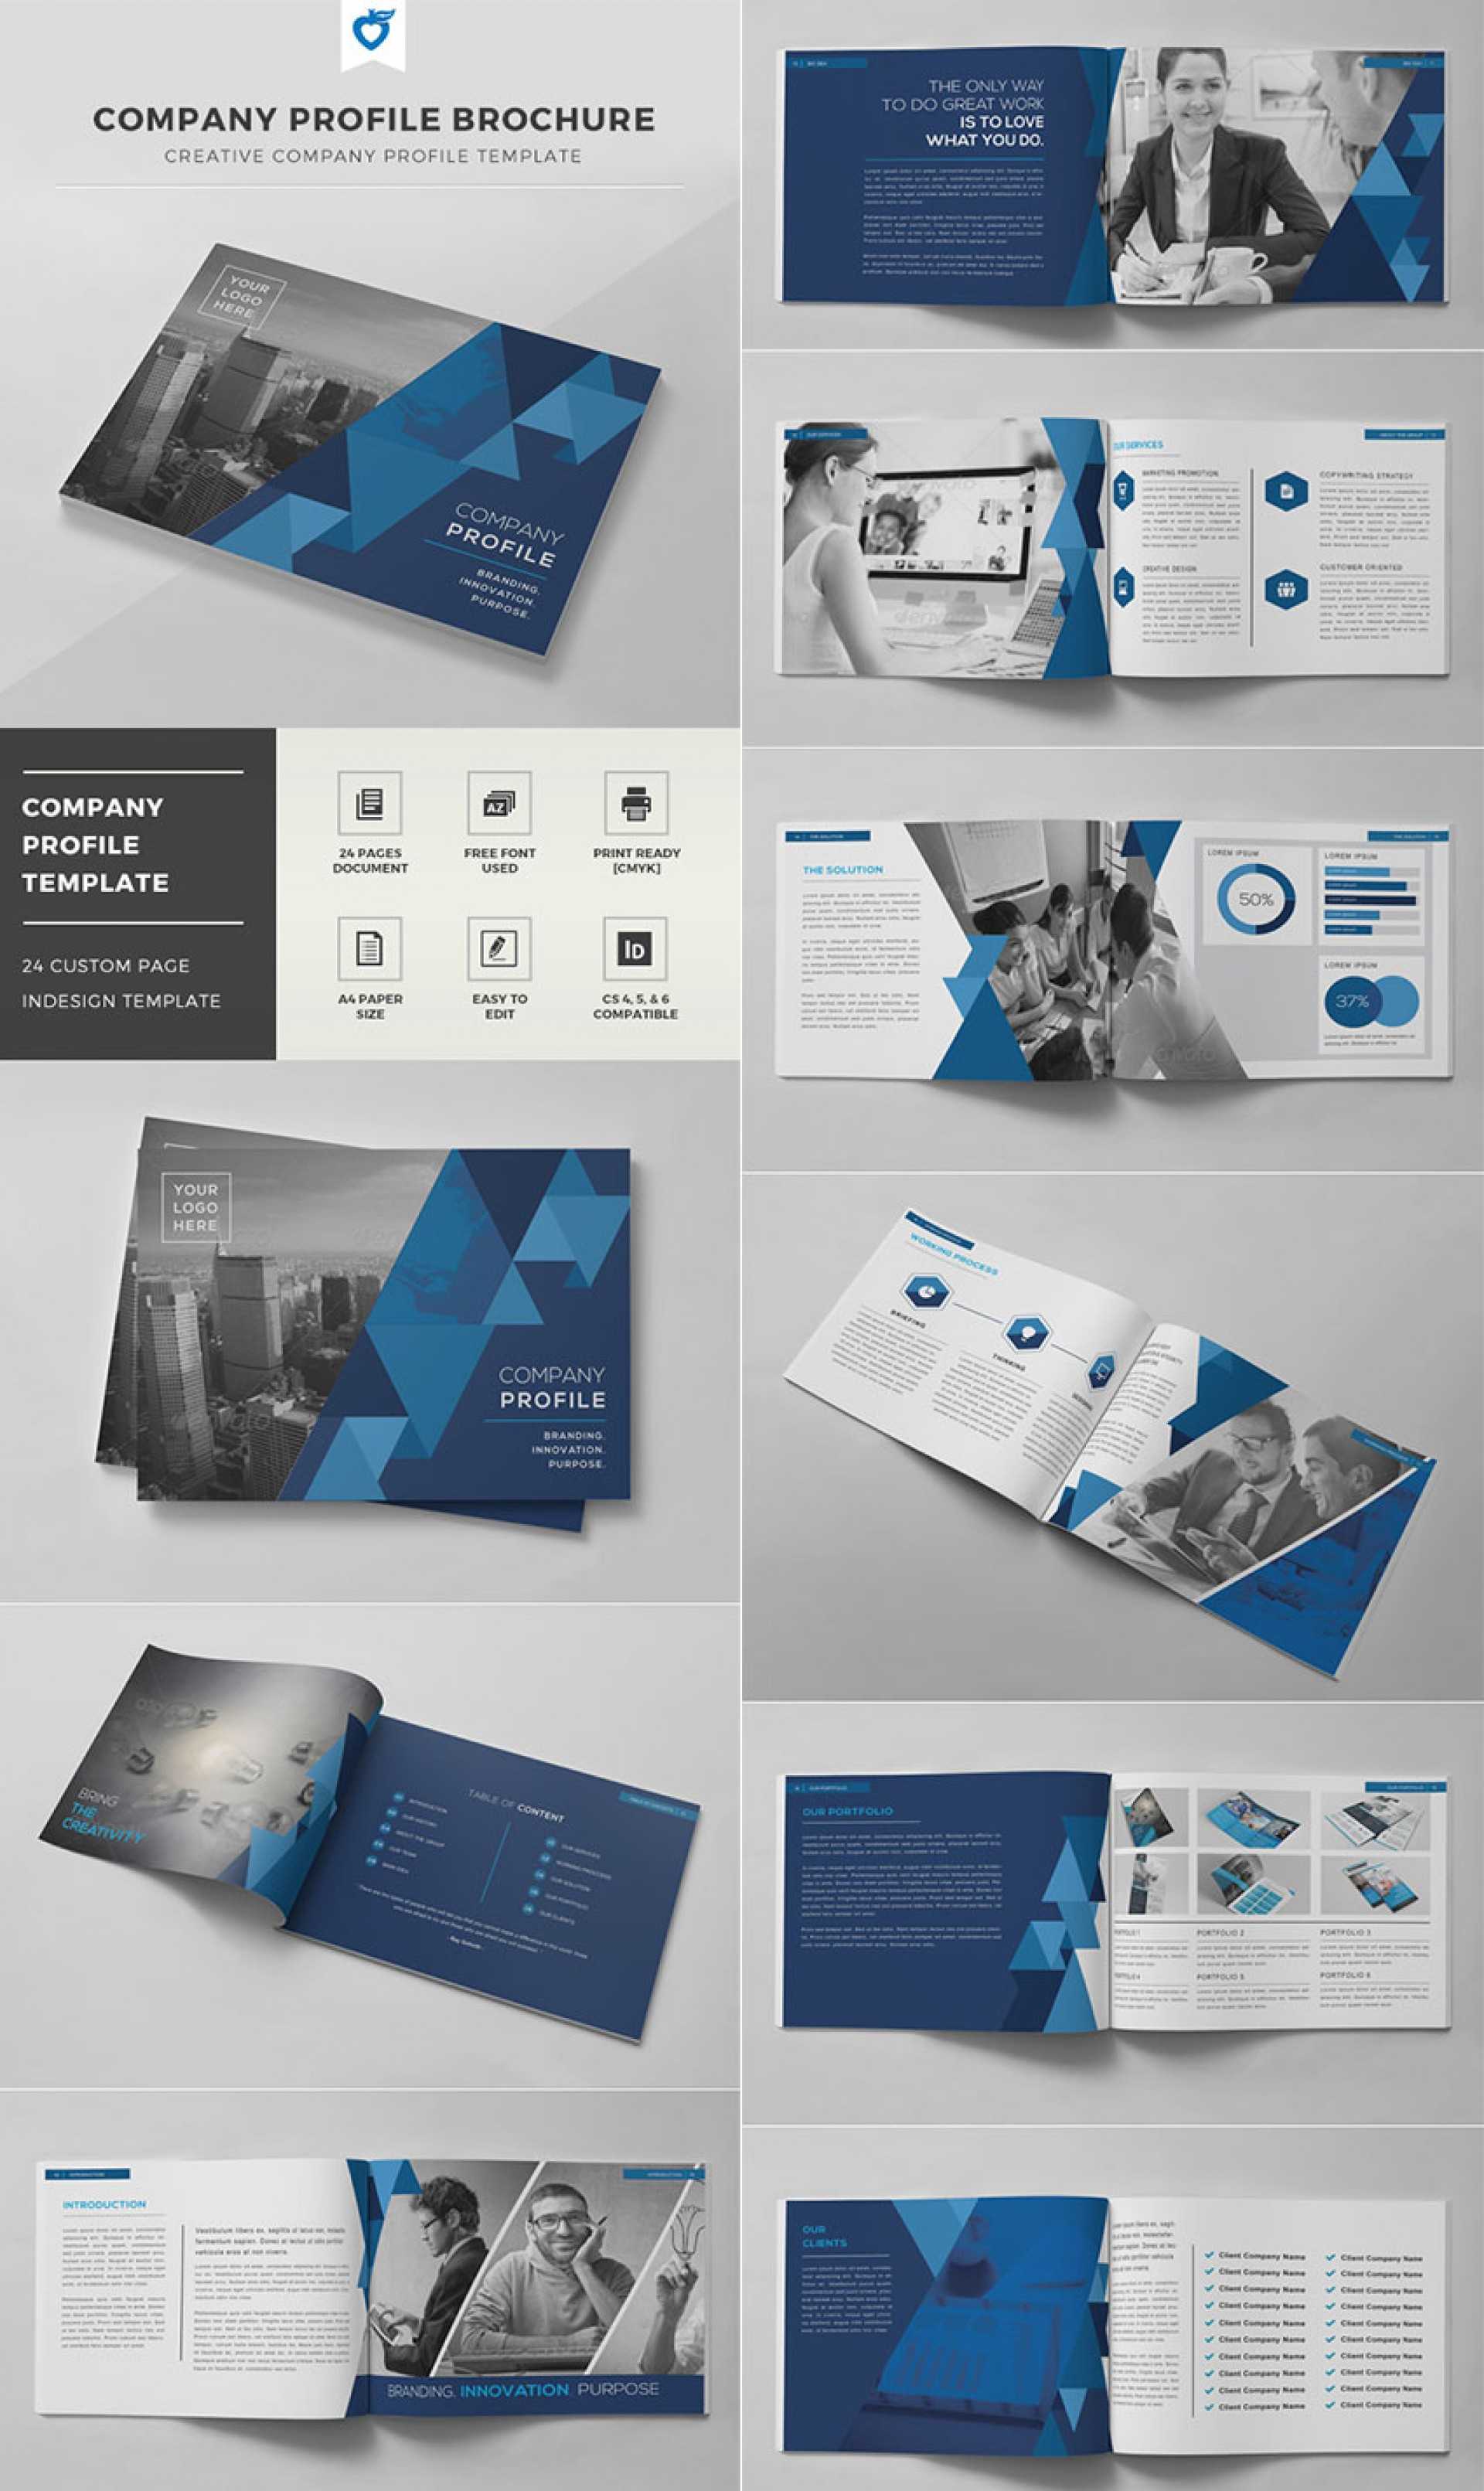 Indesign Template Free Brochure 004 Ideas Templates Company For Brochure Templates Free Download Indesign